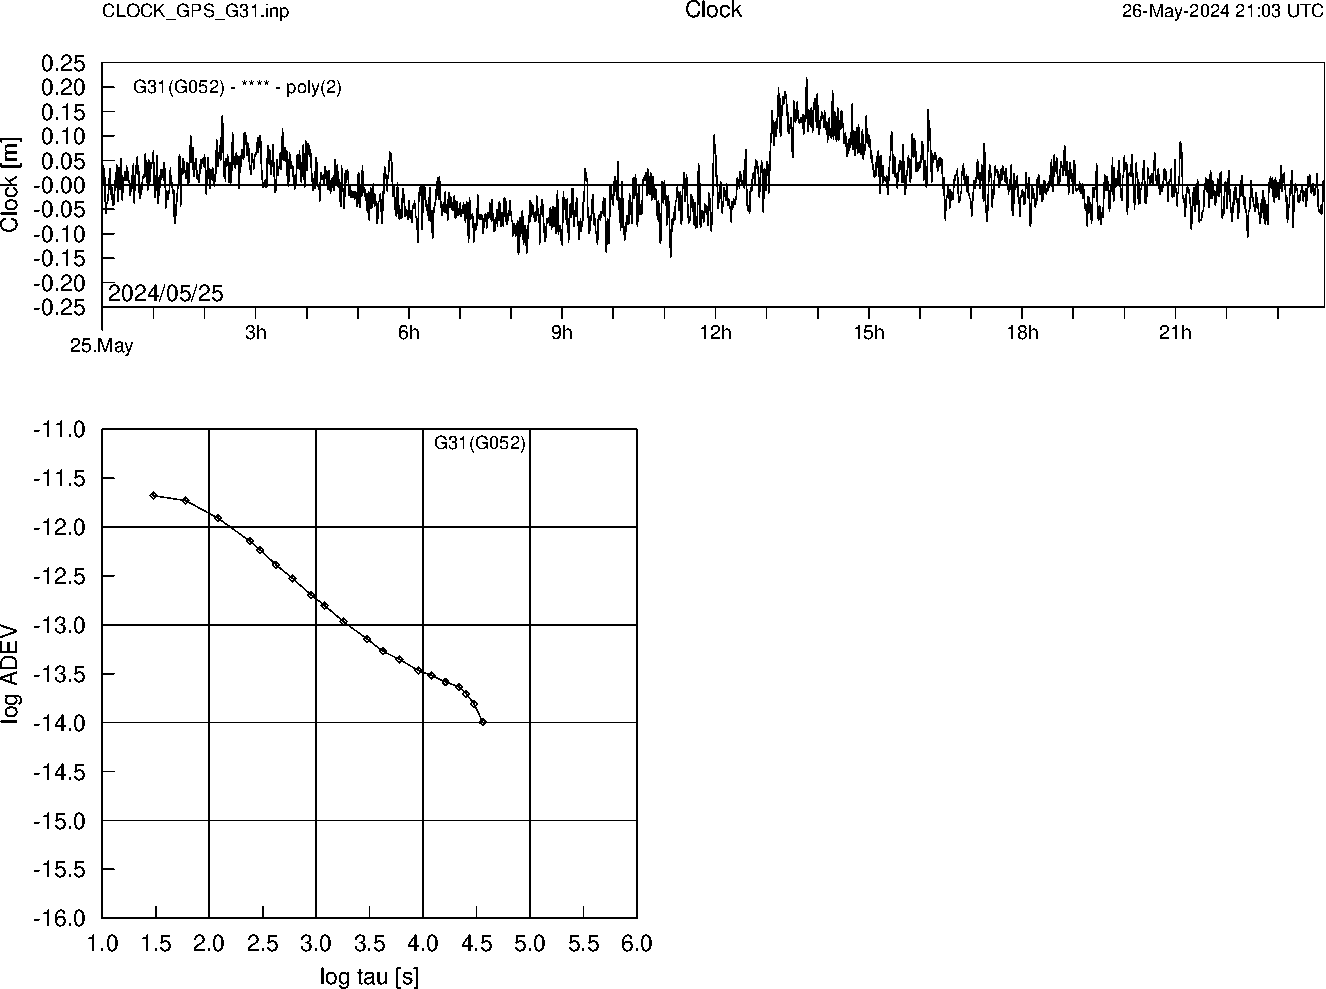 GPS G31 Clock Time Series and Allan Deviation